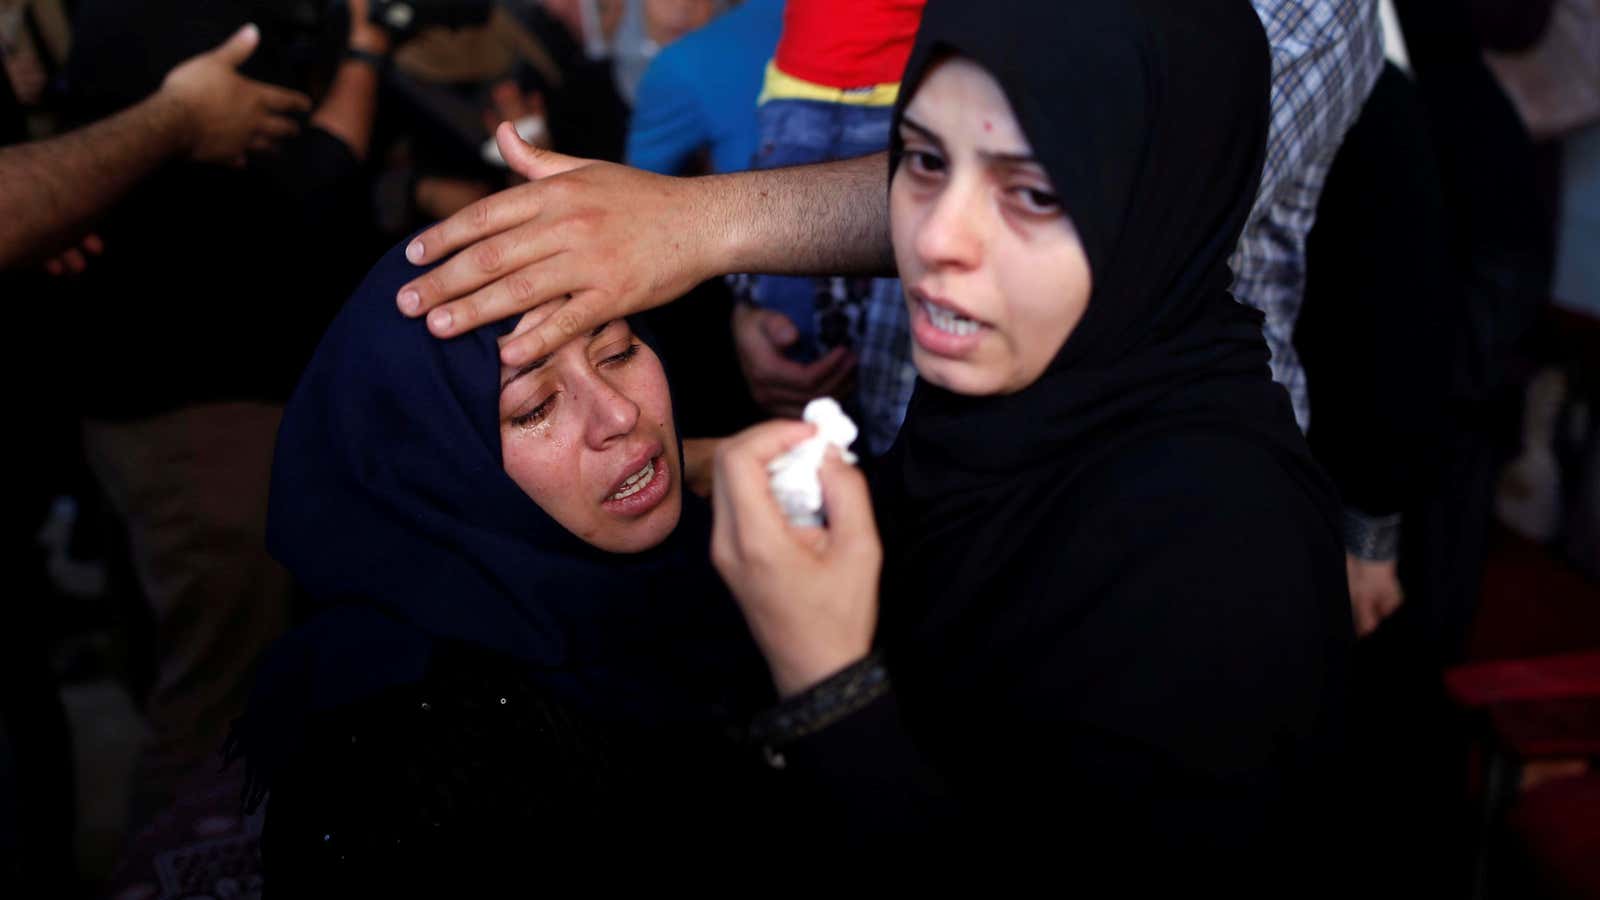 Gaza is mourning after Israeli soldiers killed at least 62 people on May 14.